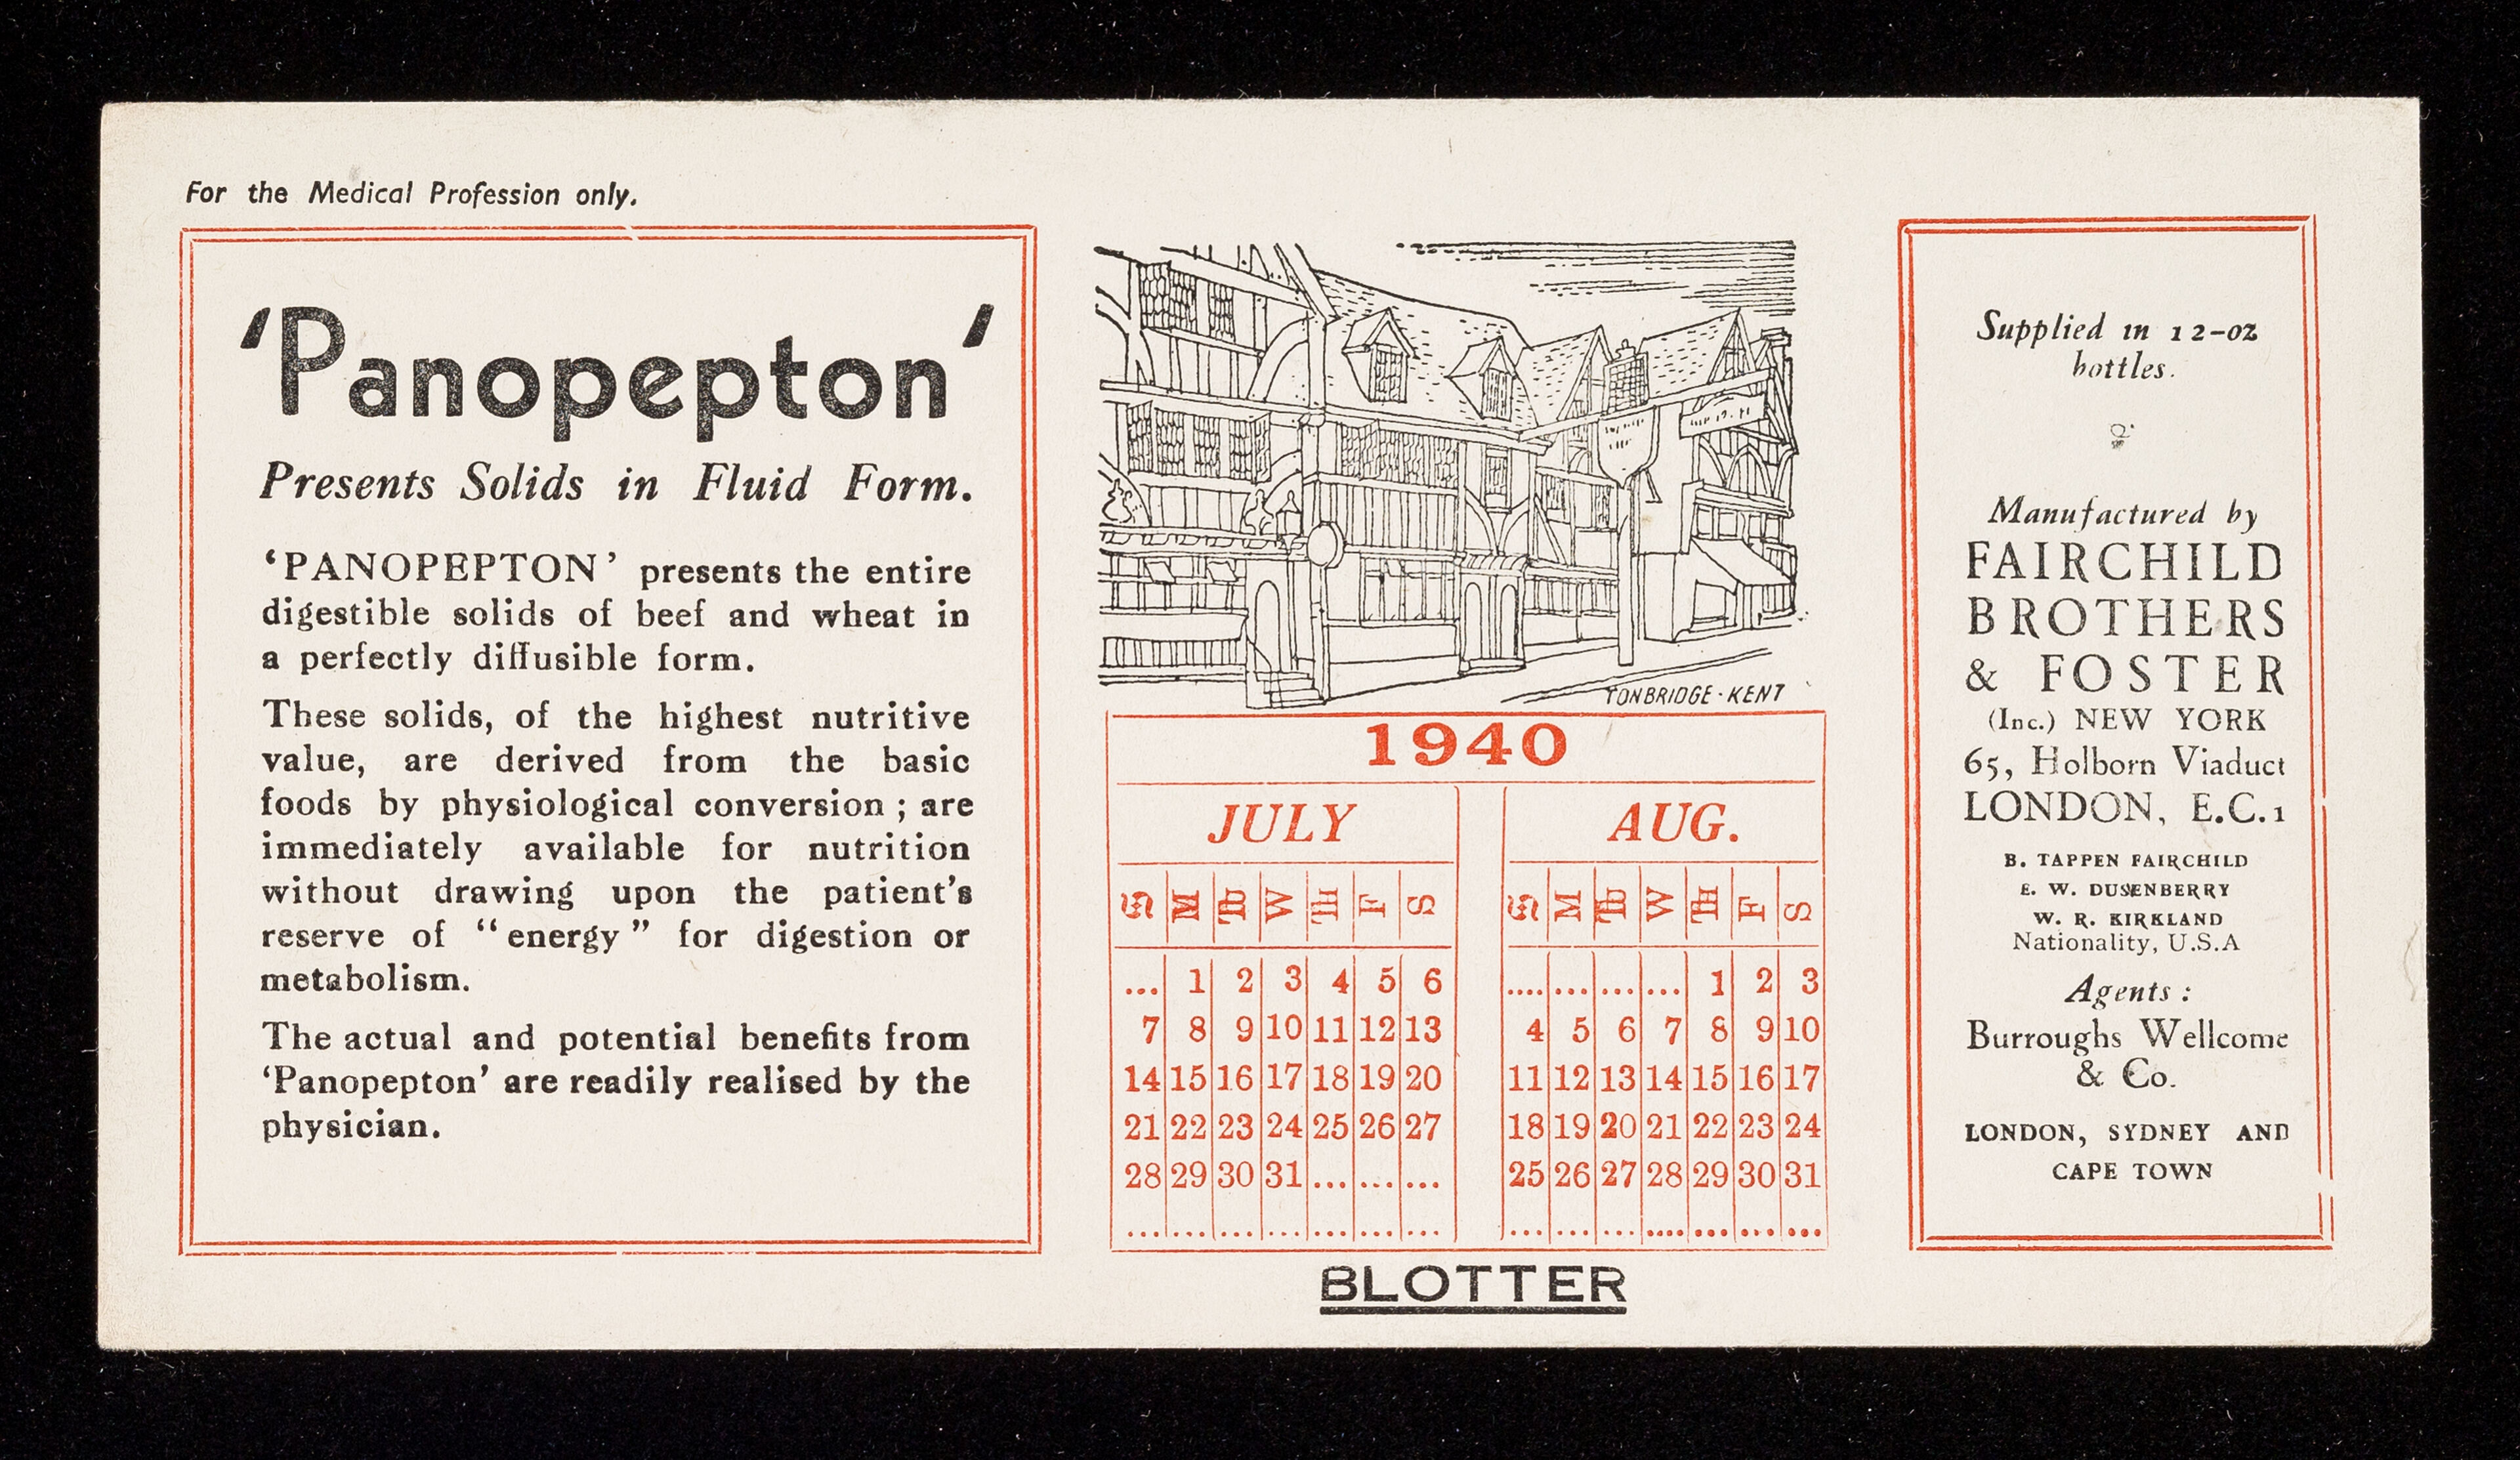 'Panopepton' presents solids in fluid form / Fairchild Brothers & Foster (Inc) New York.